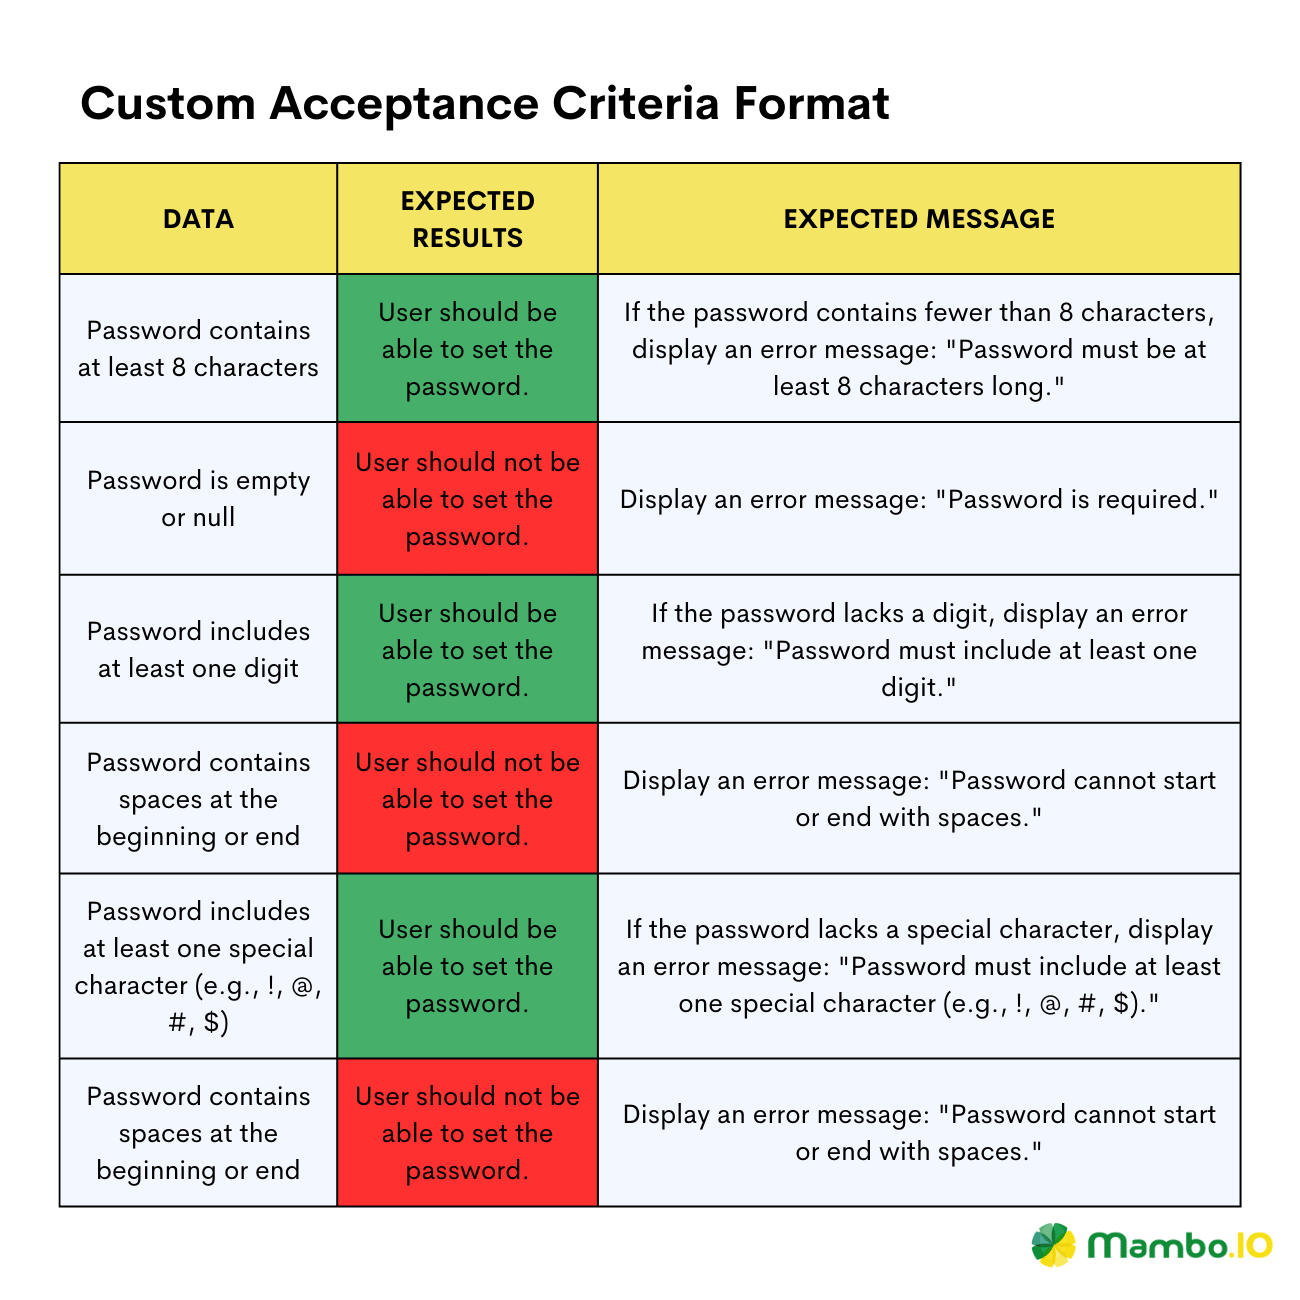 A table containing custom acceptance criteria for strong passwords.